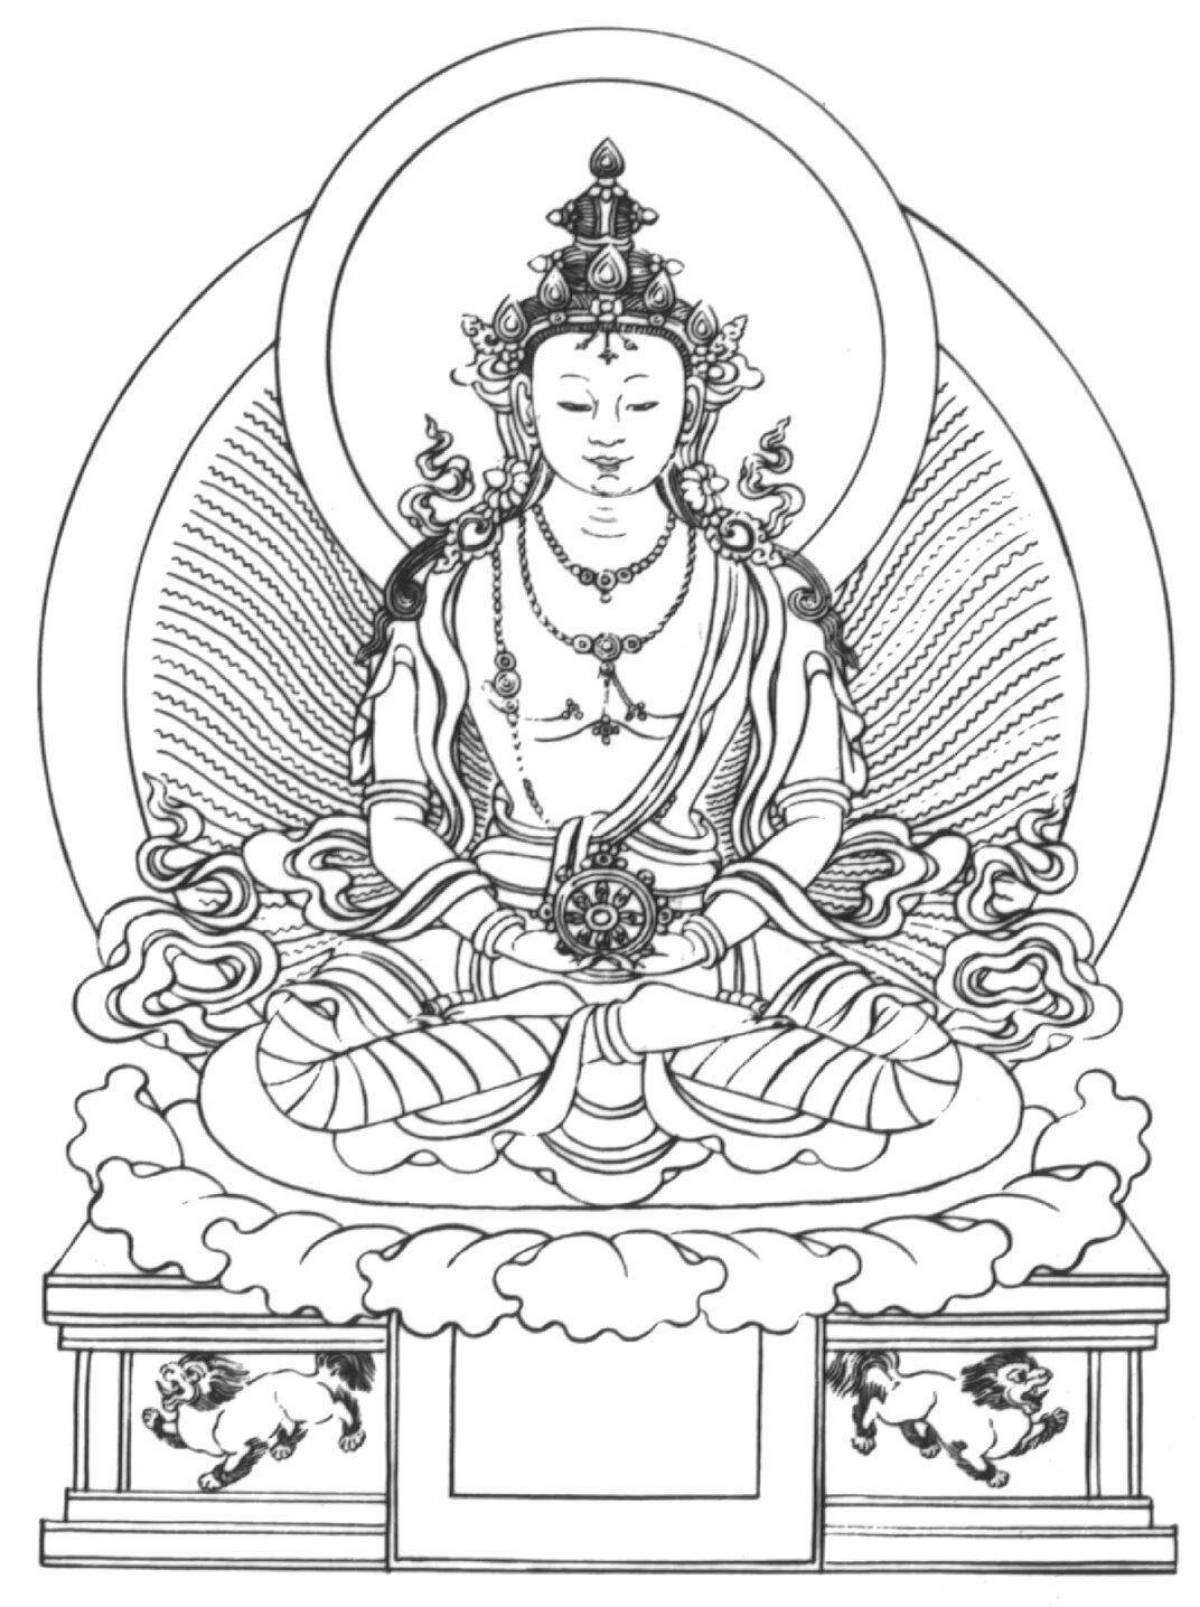 Coloring book glowing buddhism